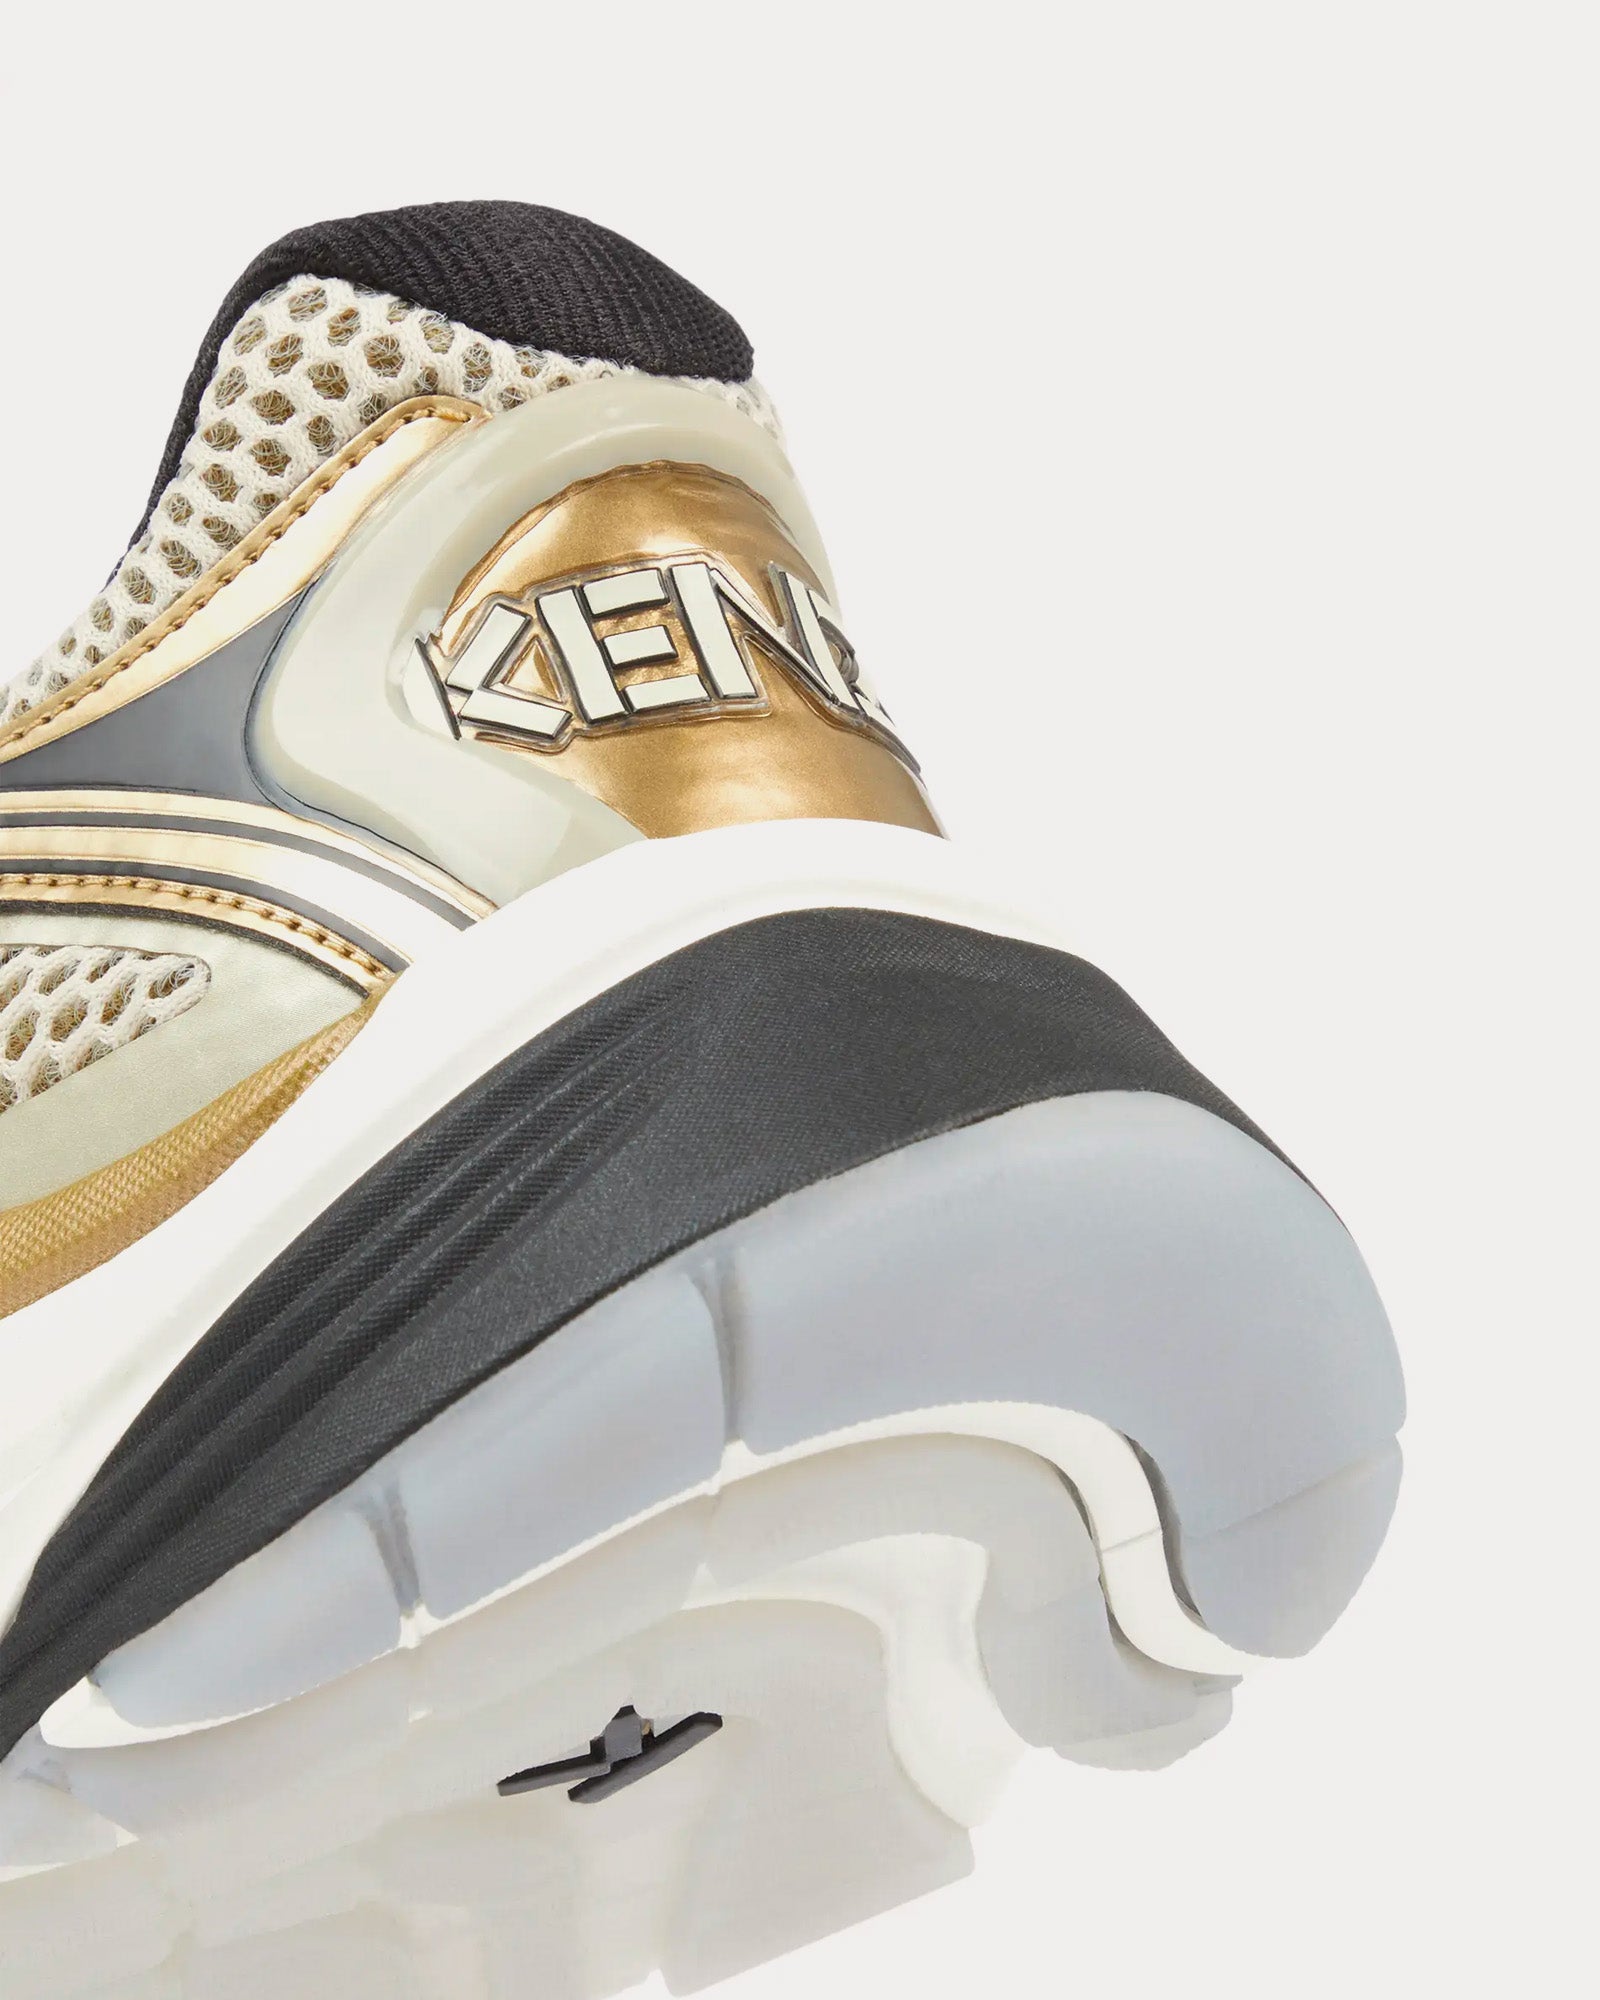 Kenzo - Pace Tech Runner Gold Low Top Sneakers